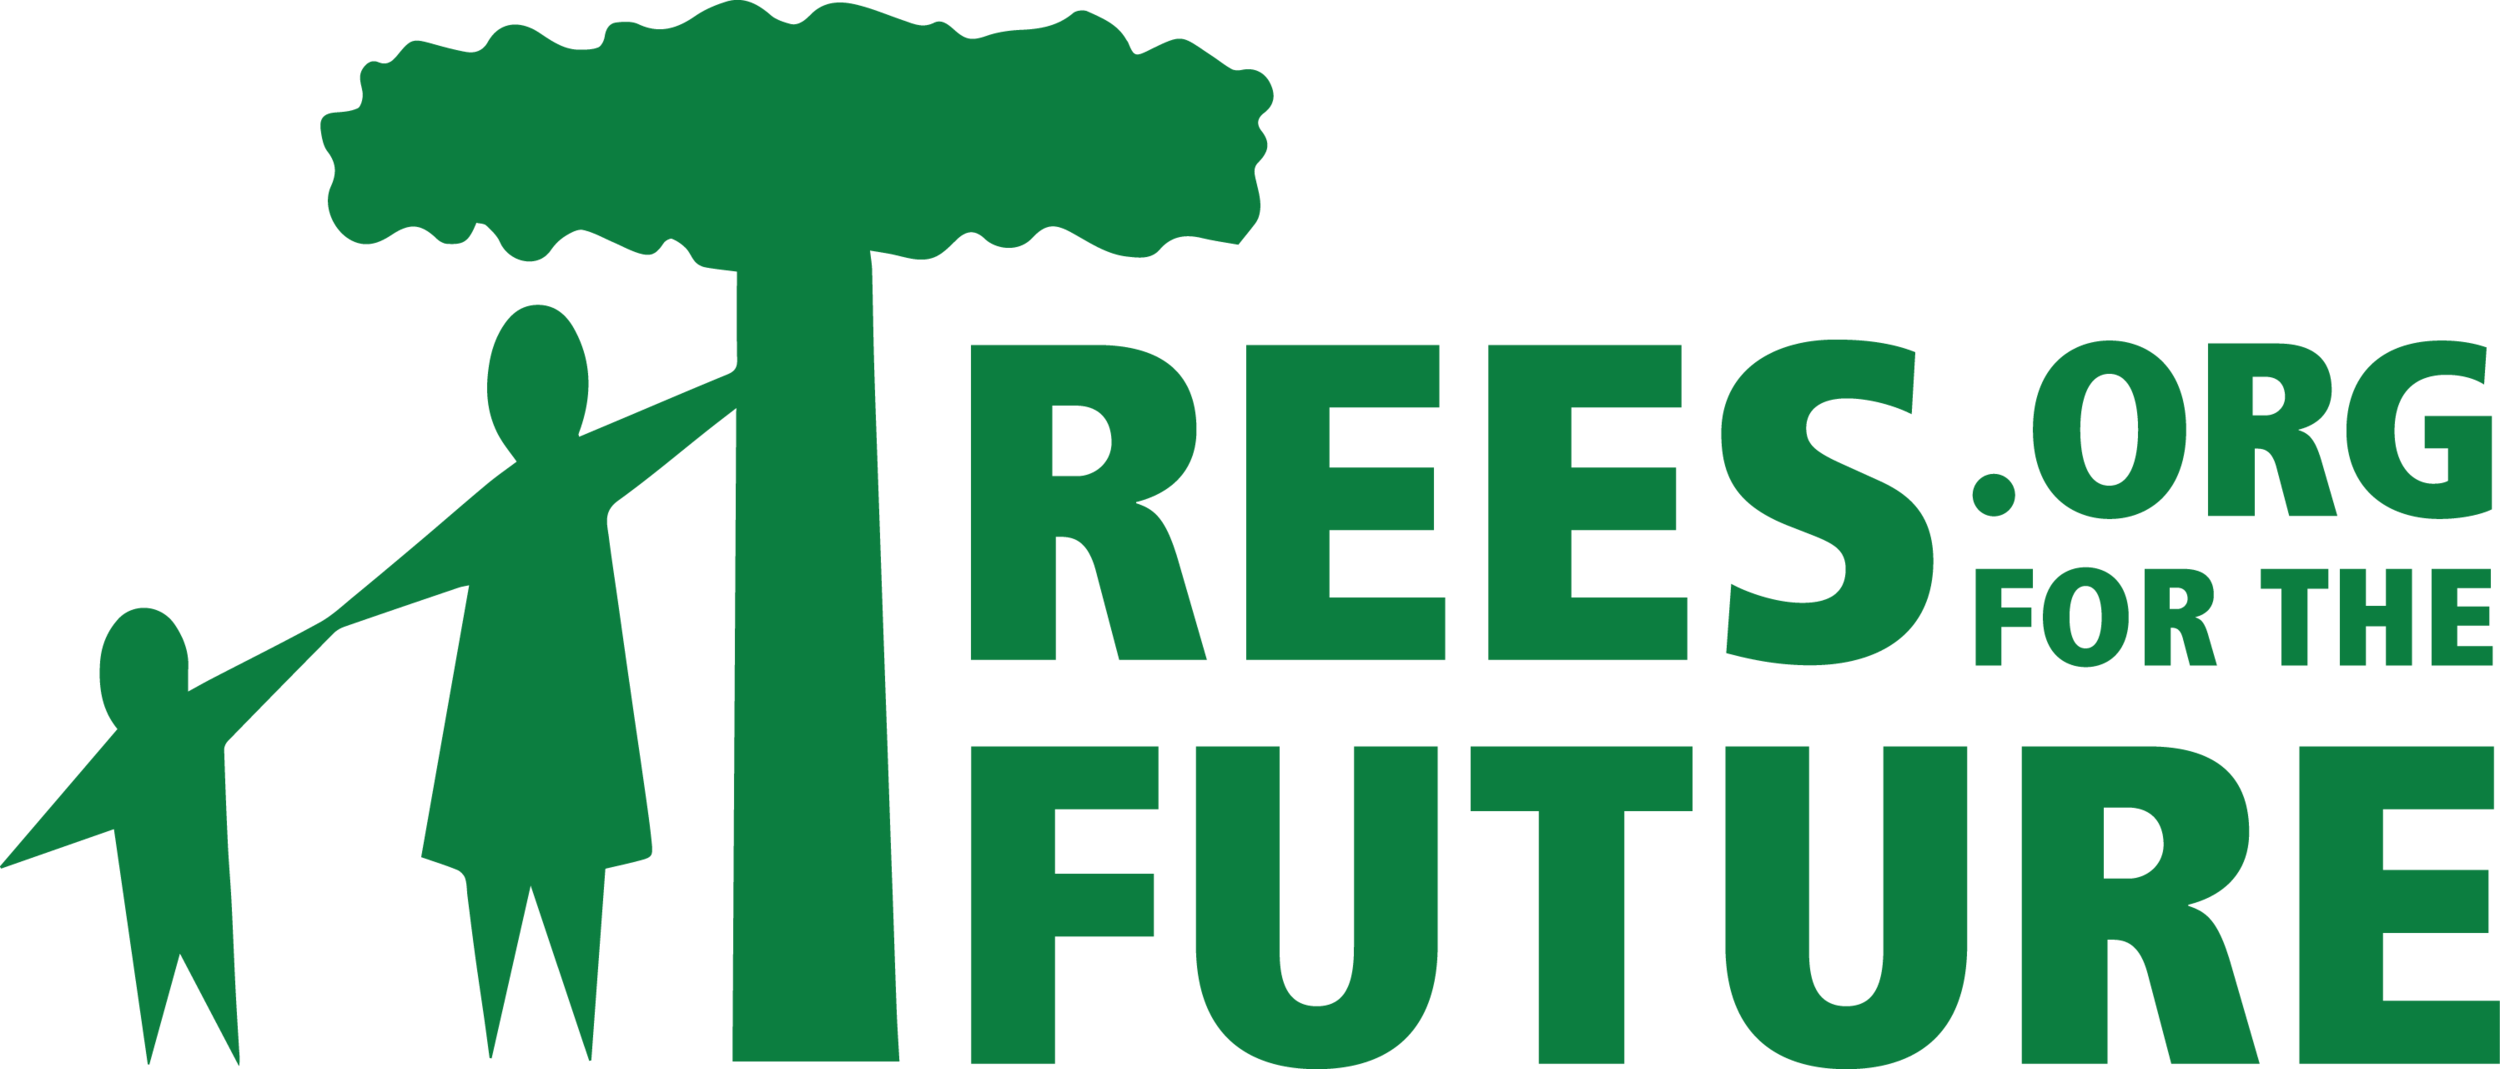 Trees for the Future Logo.png